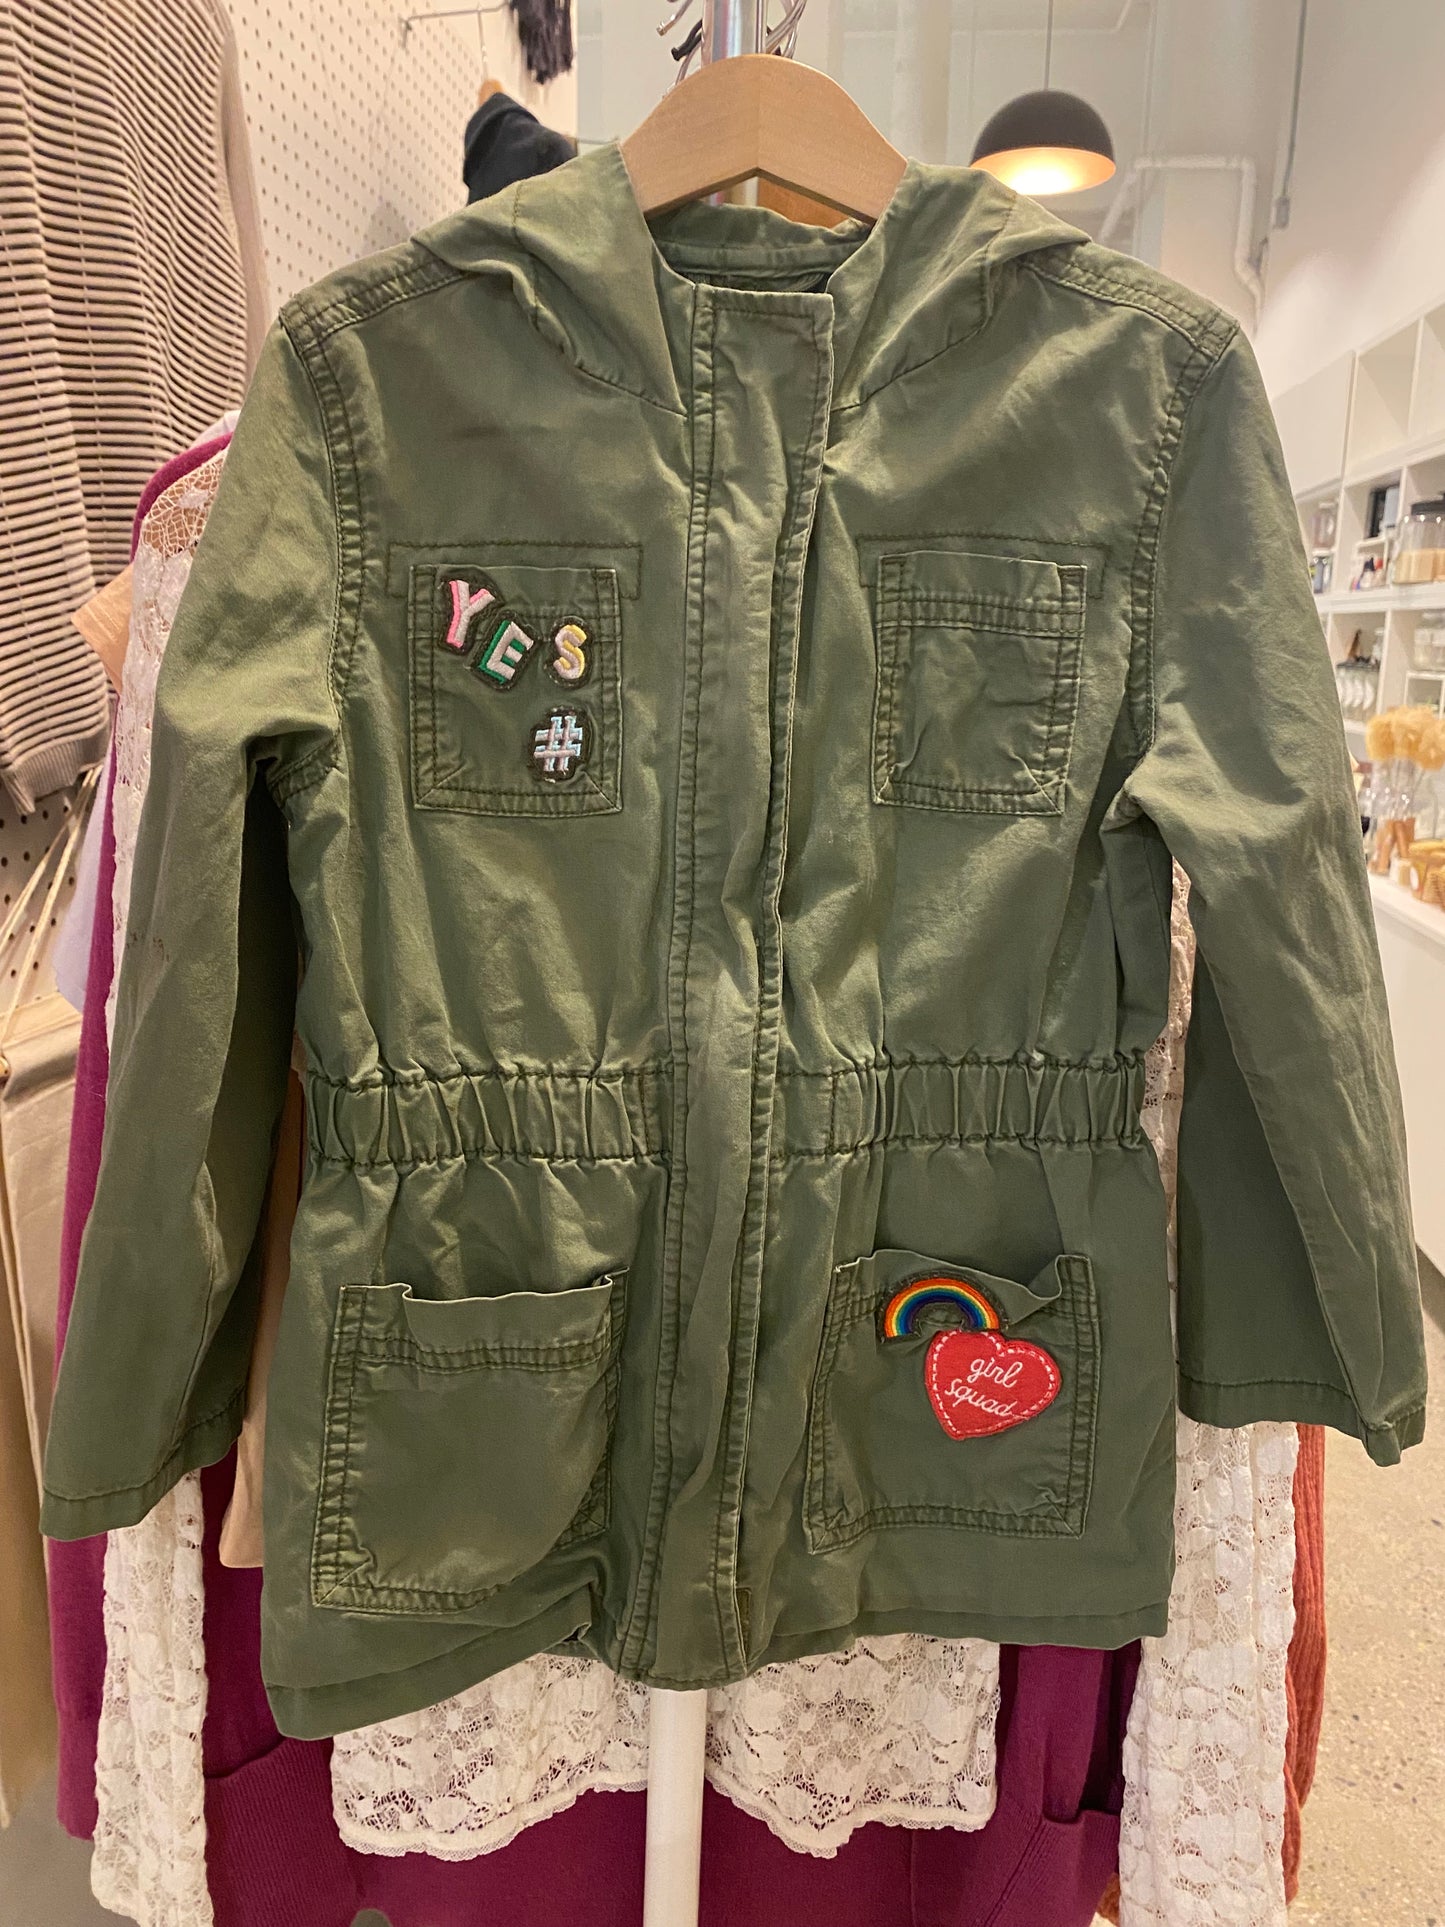 Consignment #7790-03 Old Navy girl’s green jacket sz S (6-7)